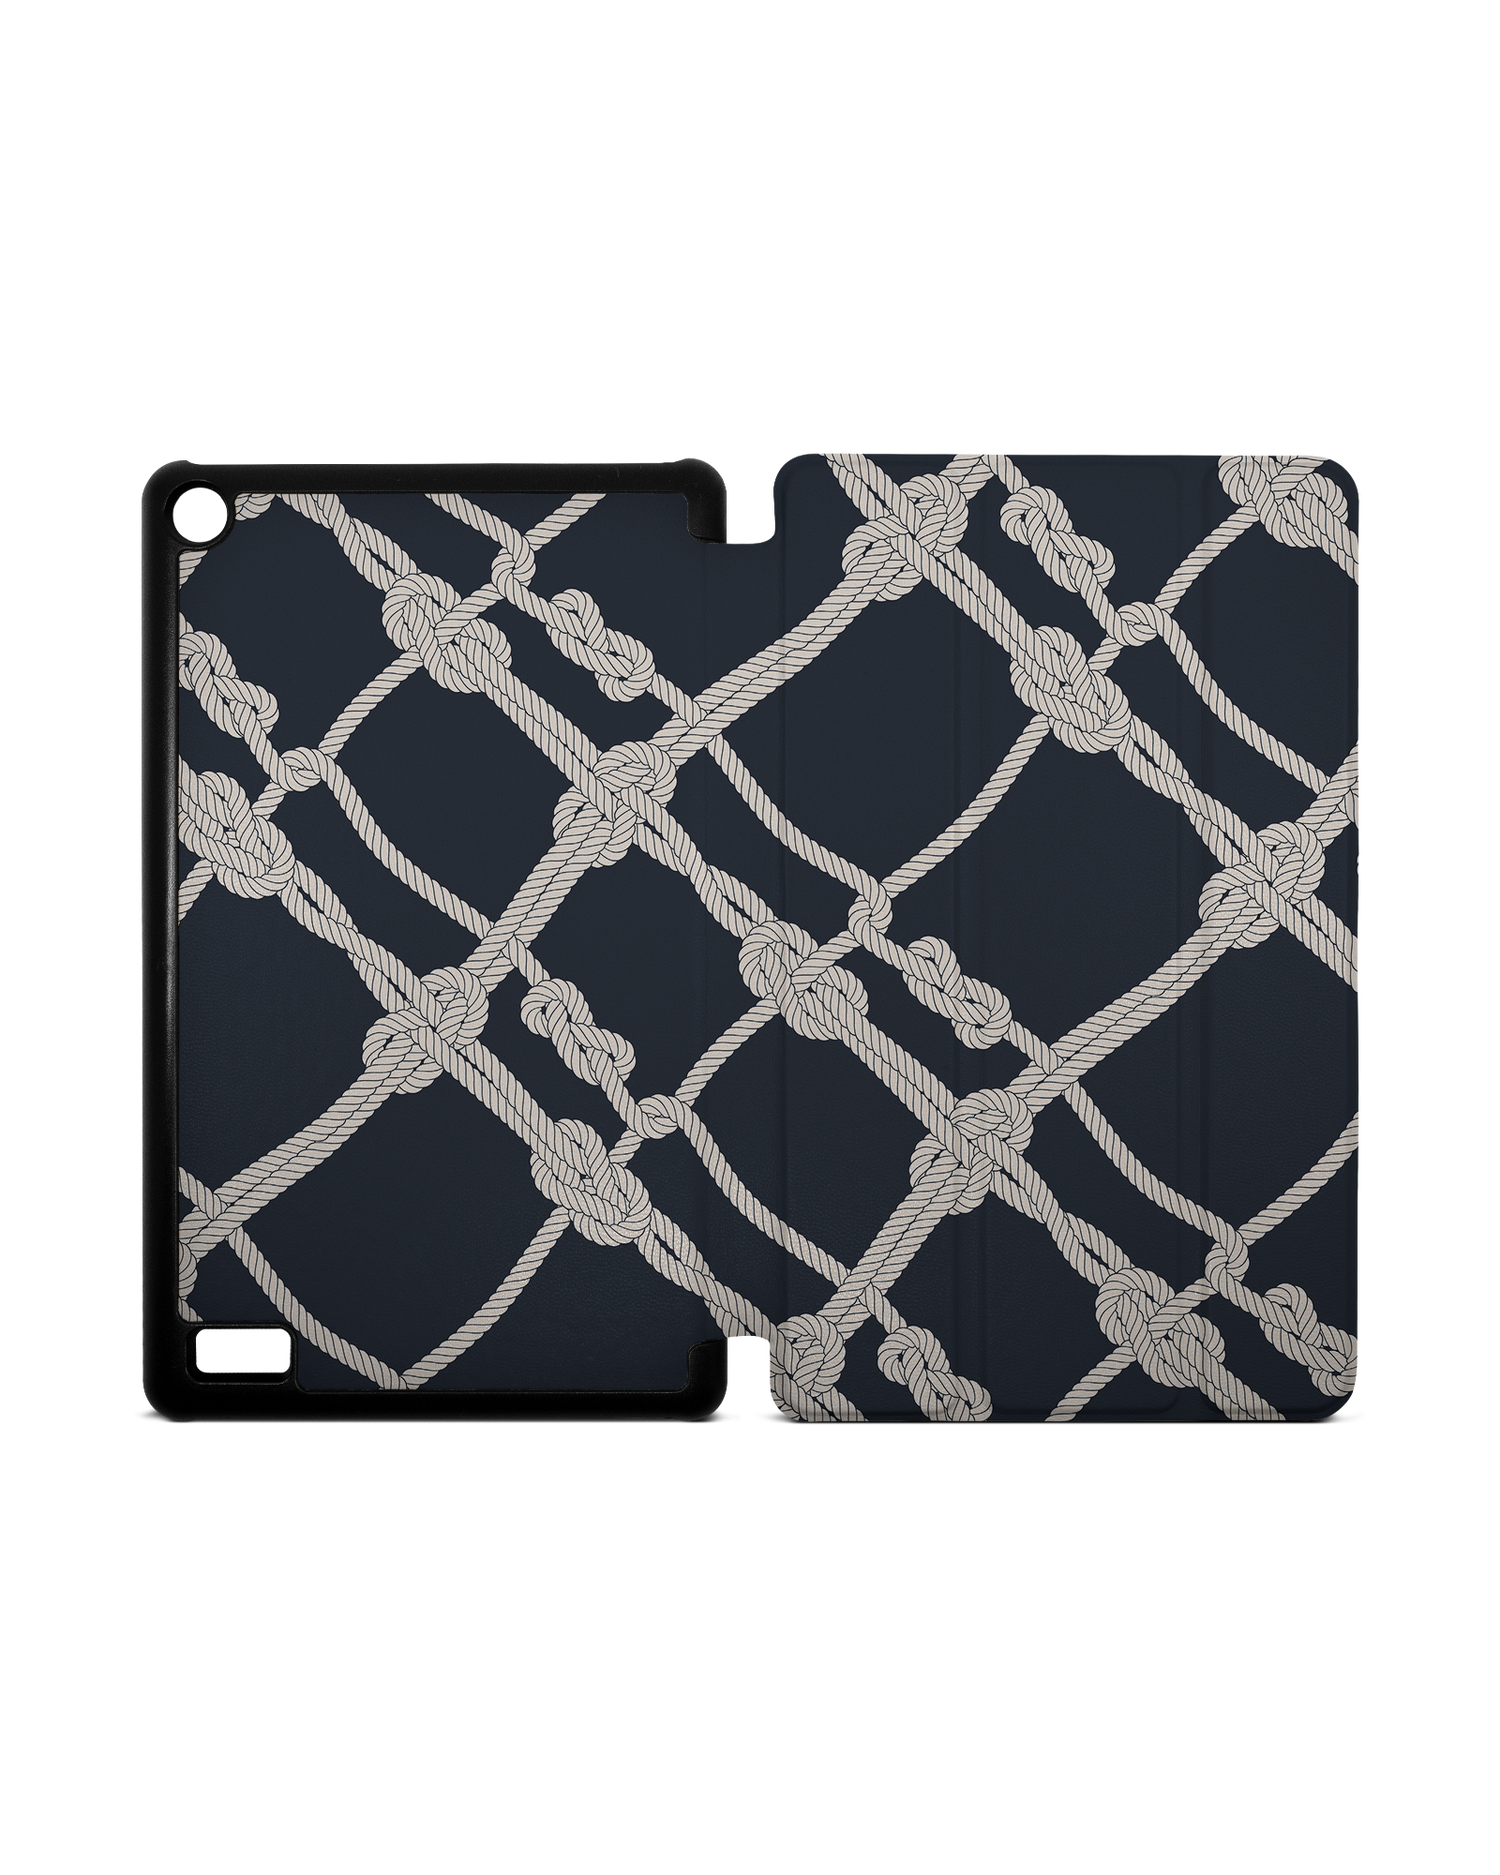 Nautical Knots Tablet Smart Case for Amazon Fire 7: Opened